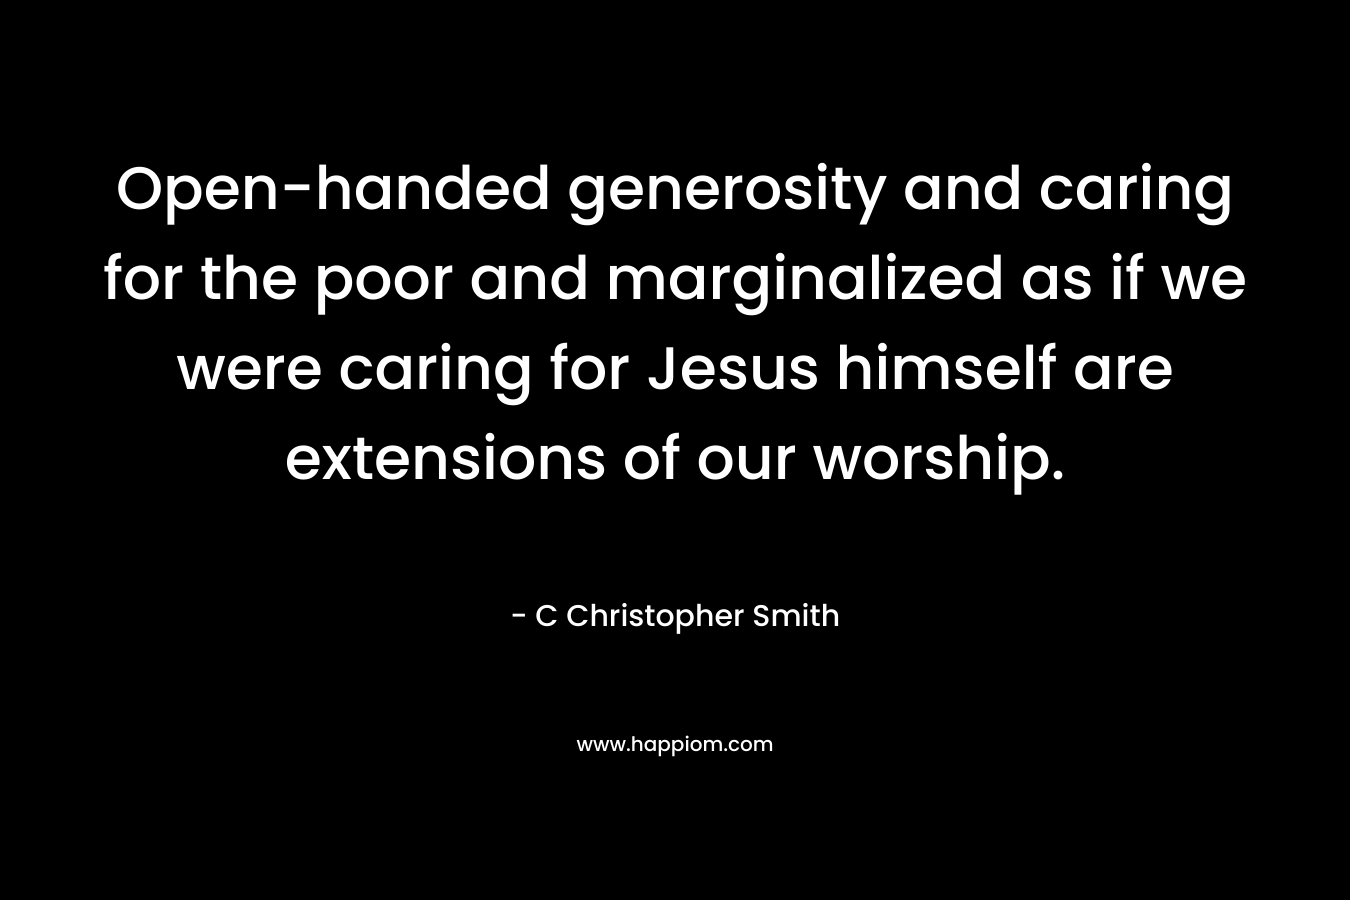 Open-handed generosity and caring for the poor and marginalized as if we were caring for Jesus himself are extensions of our worship.